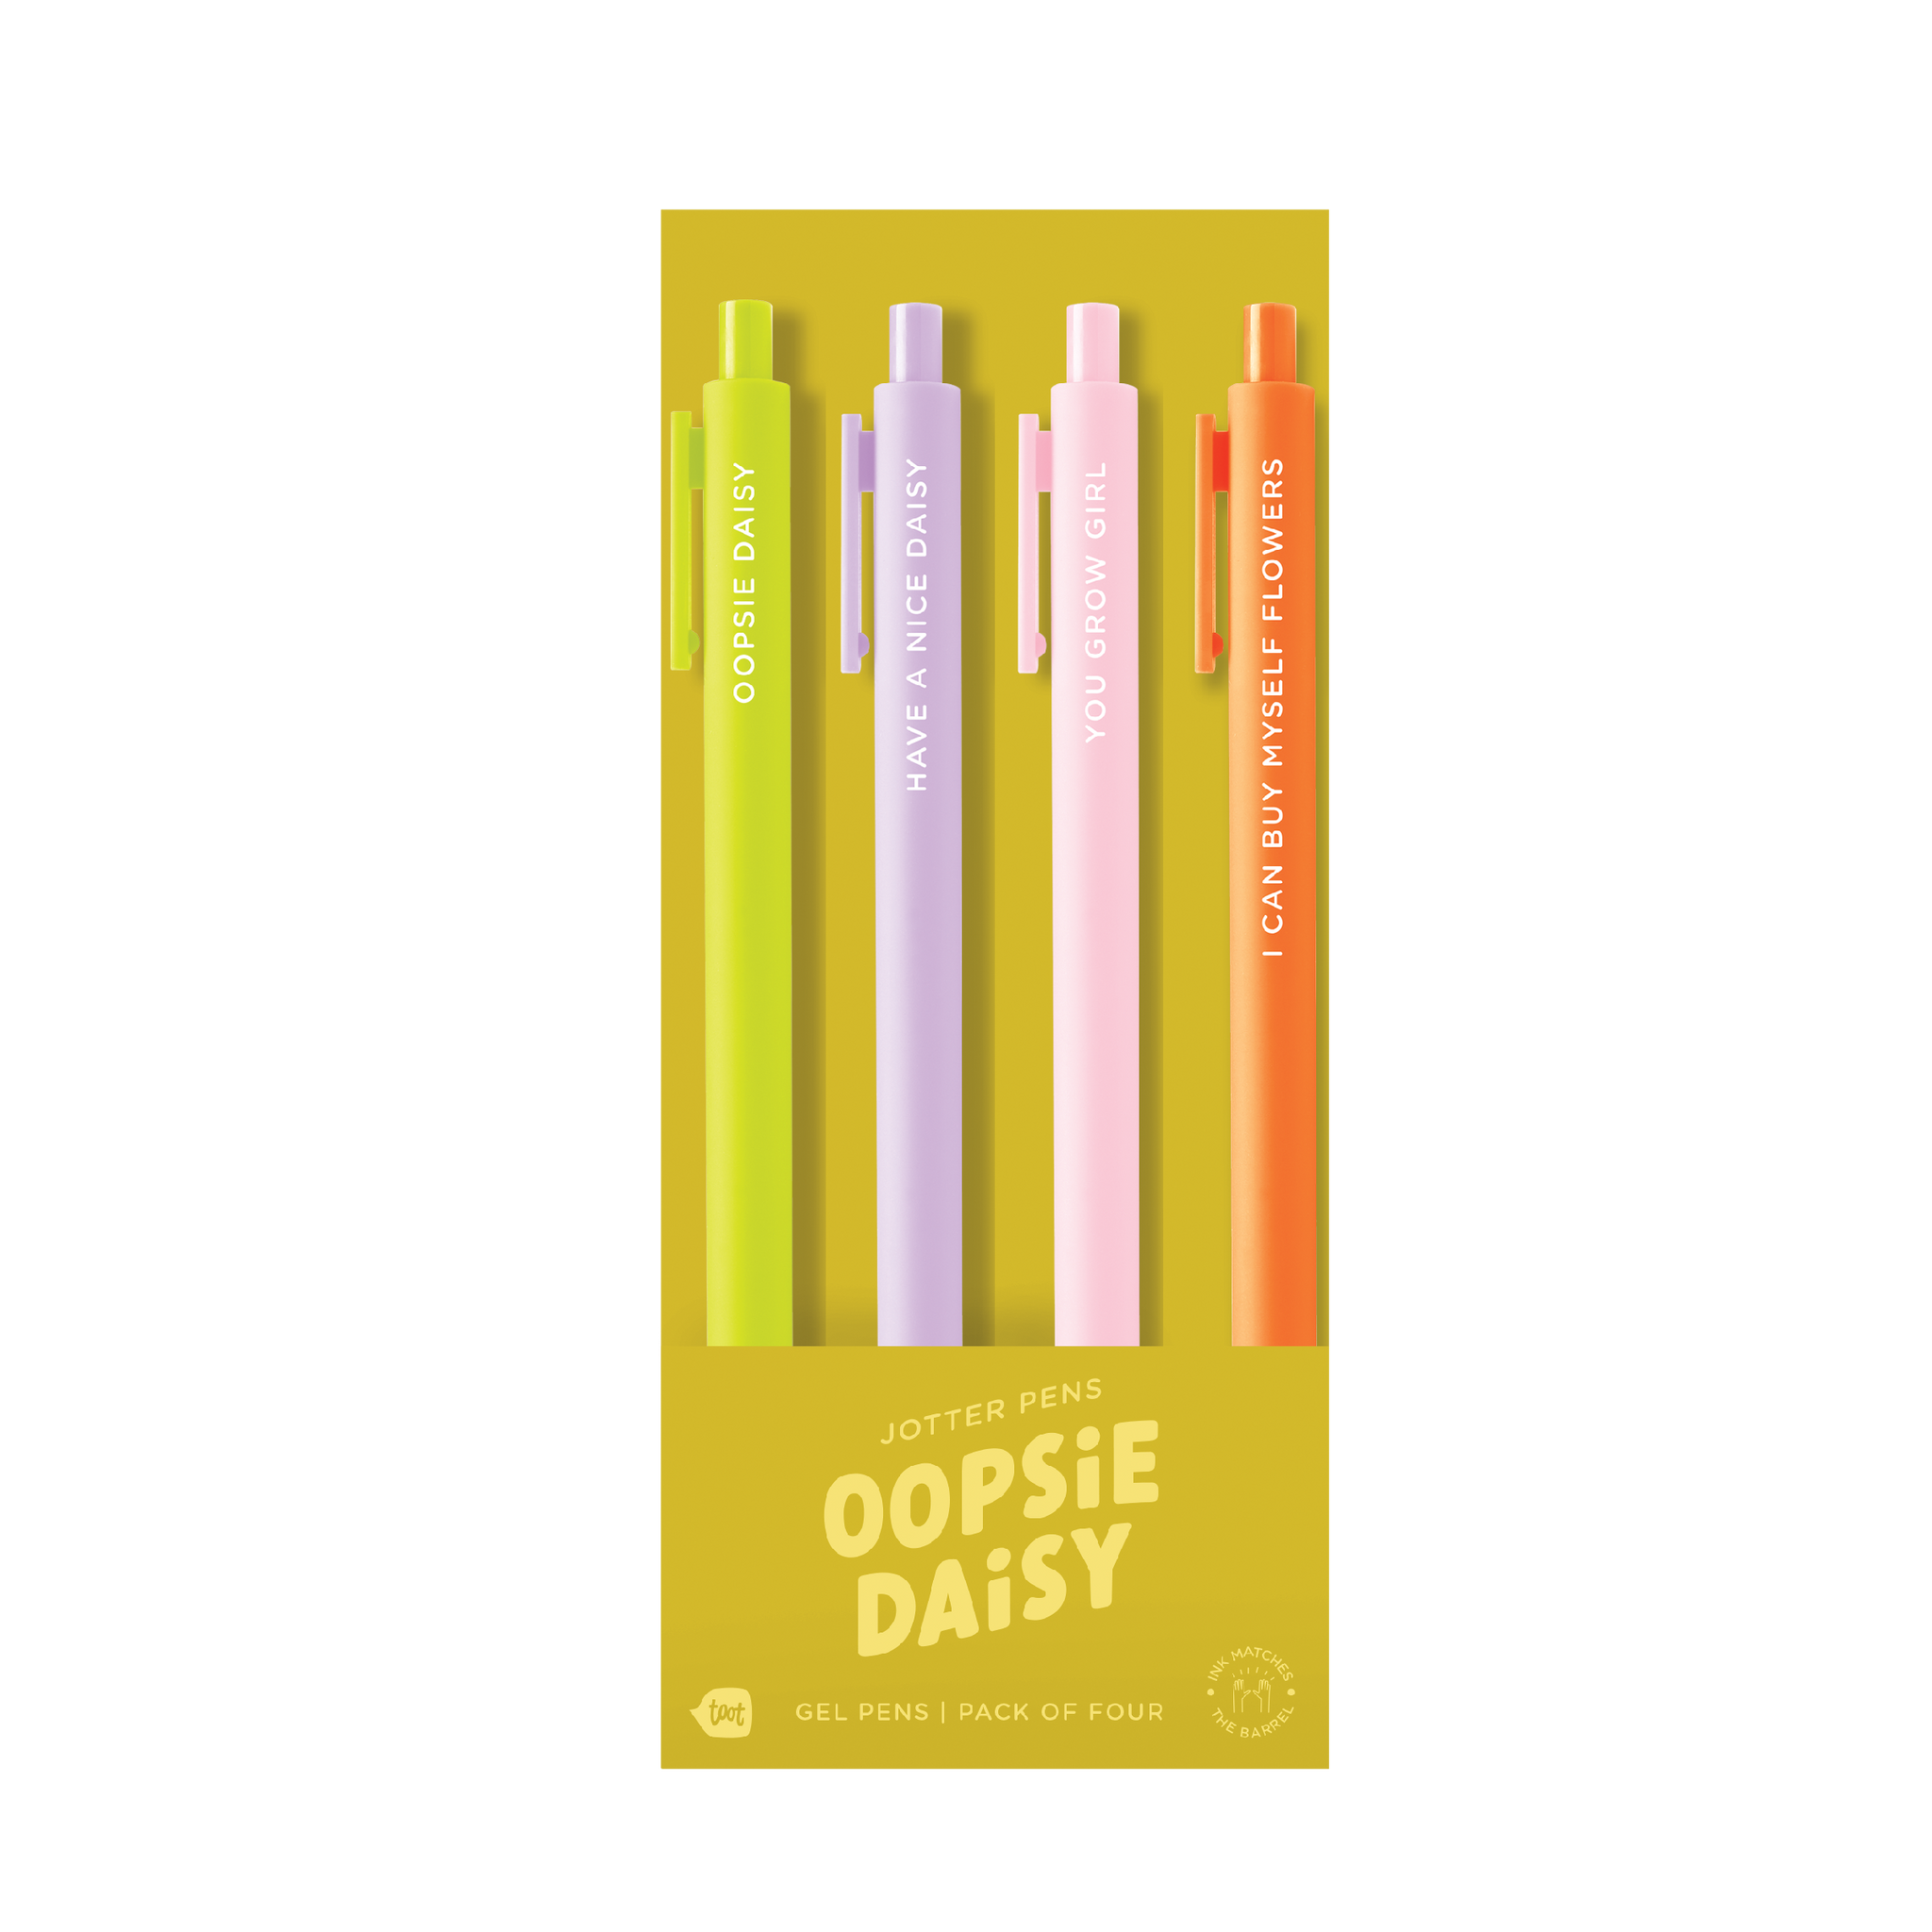 "Oopsie Daisy" Jotter Pens - Set of 4